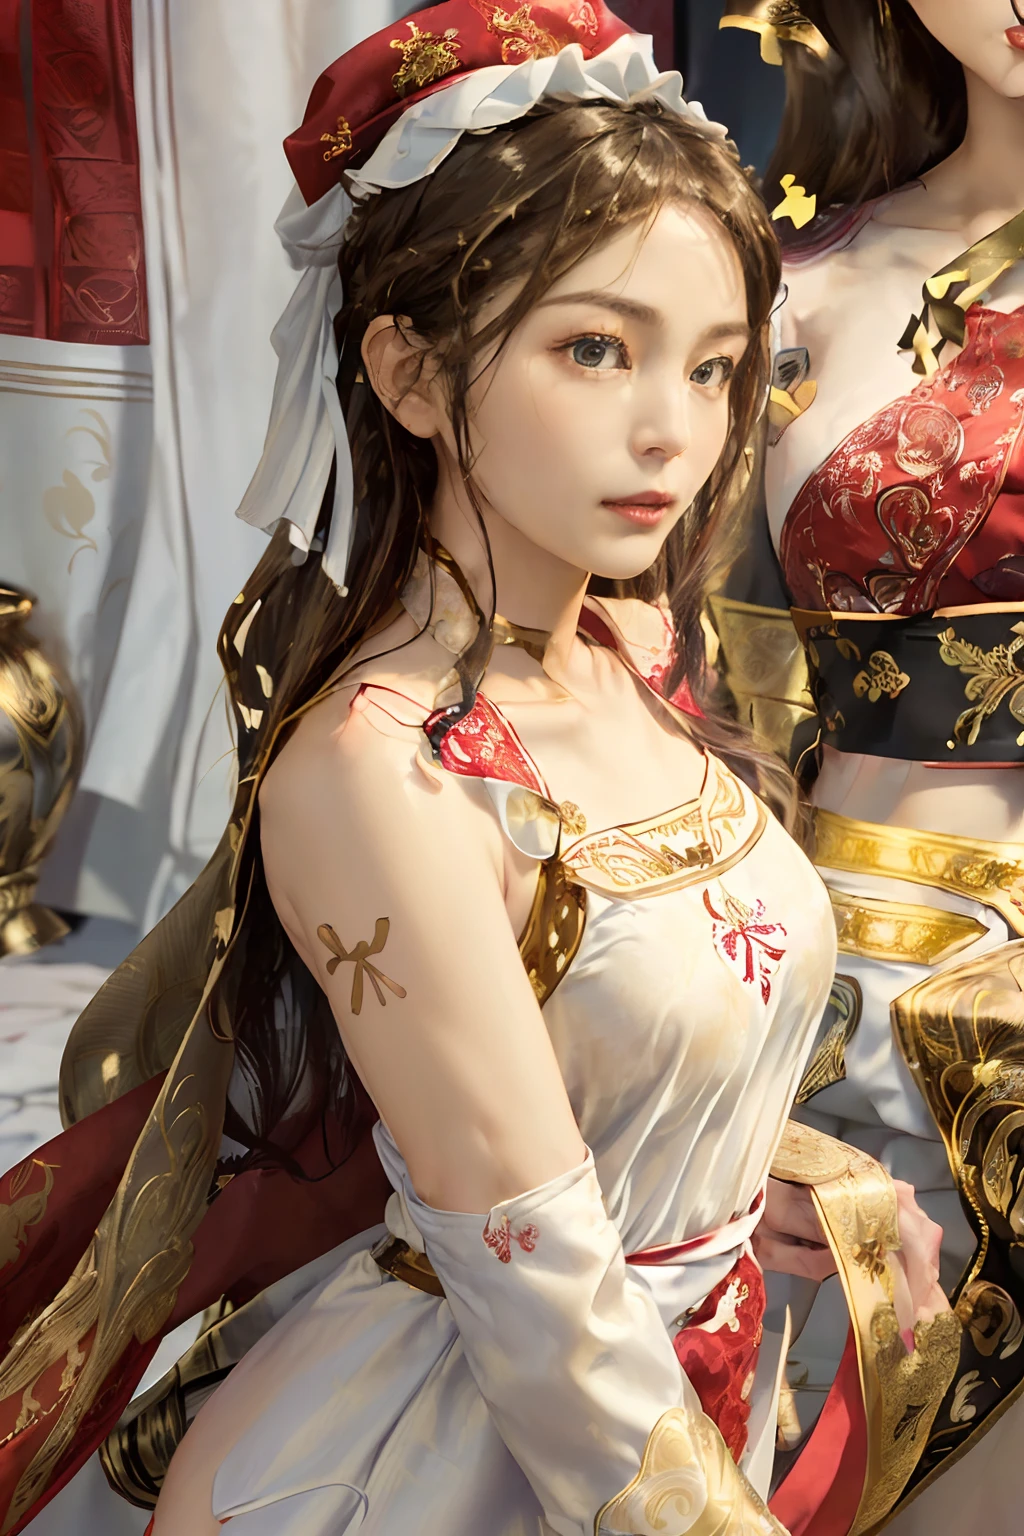 ((top-quality、8K、​masterpiece、Photorealistic:1.4、fine-textured、Beautiful and detailed:1.2)), (Long hair, Beautiful hairstyle:1.5), (gold foil, Intricately drawn paisley pattern, Delicate workmanship, (Red and white fabric:1.4), maid dress:1.5)、Clear, Fine-grained skin、Beautiful clear eyes、(cleavage of the breast)、Carefree and natural smile、(Hair disheveled in the wind:1.3)、Beautiful girl with a smile、(thin-waist:1.3)、(Dynamic and provocative poses:1.2)、(Backshots)、(NSFW:1.8)